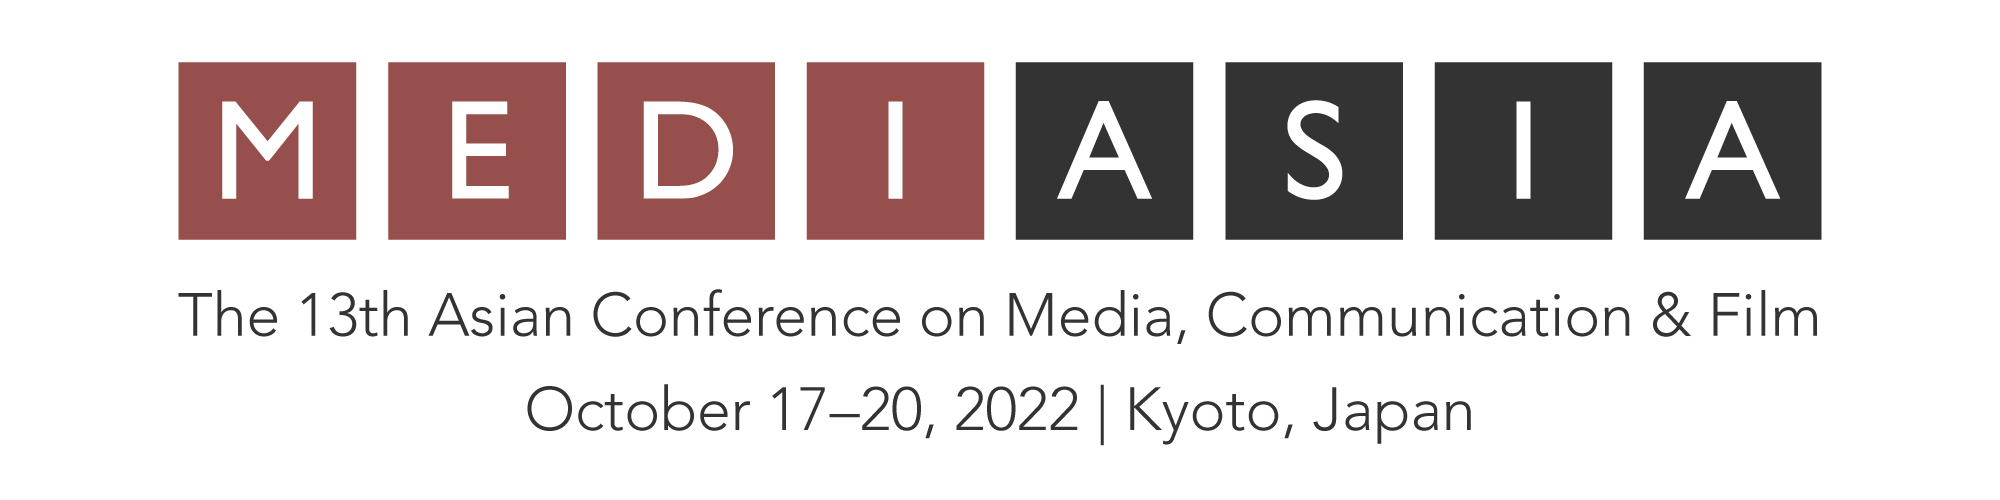 The-13th-Asian-Conference-on-Media-Communication-Film-MediAsia2022